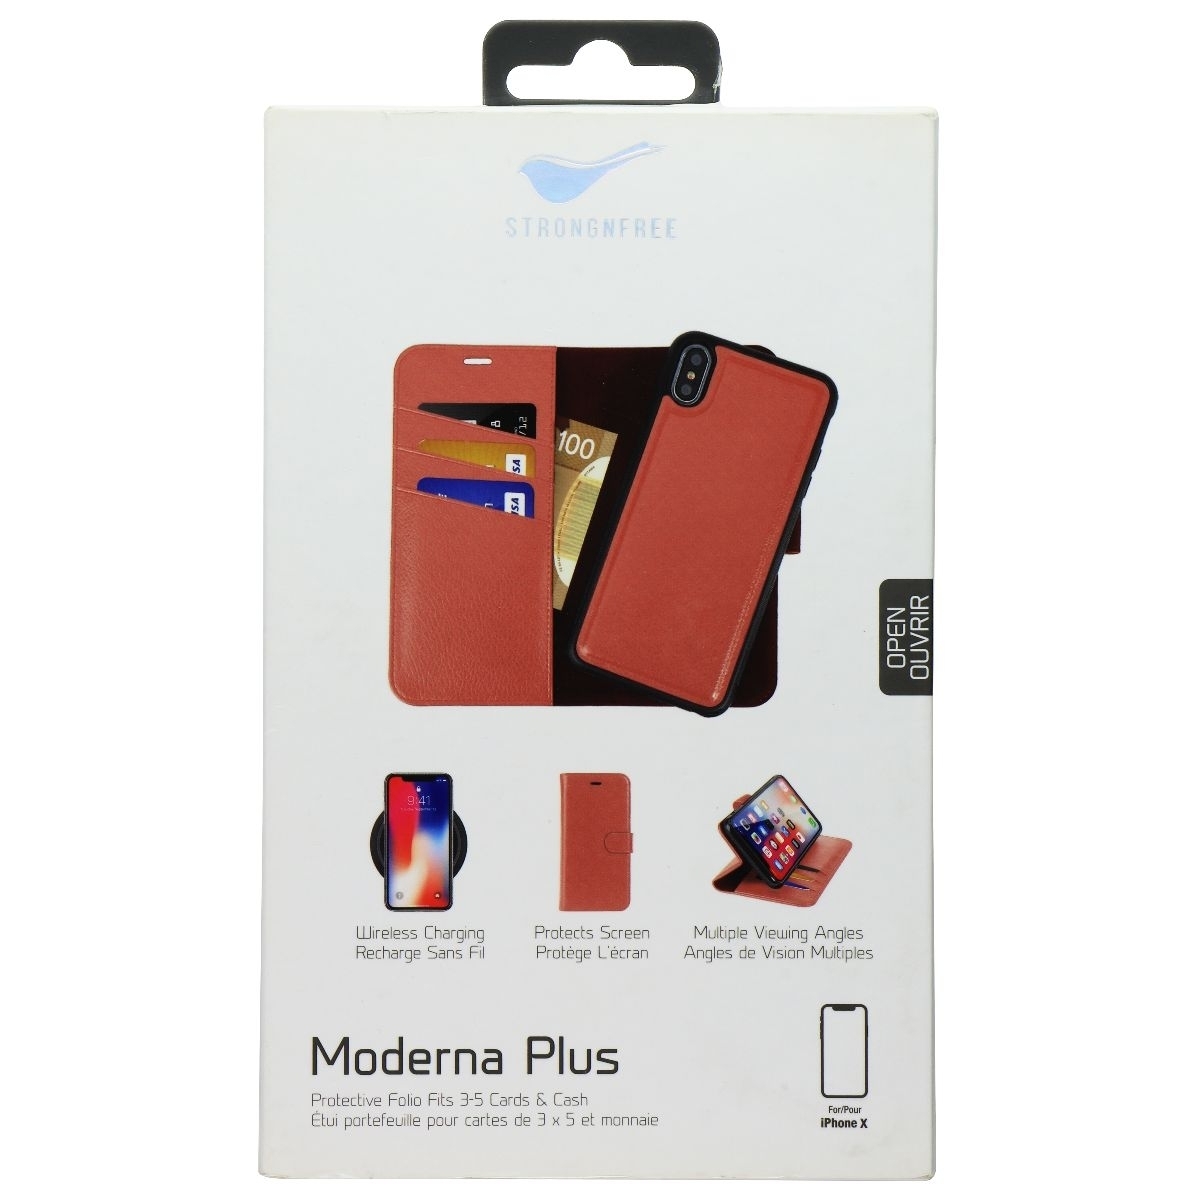 StrongNFree Moderna Plus Series Wallet Case For IPhone Xs And X - Dusty Red (Refurbished)